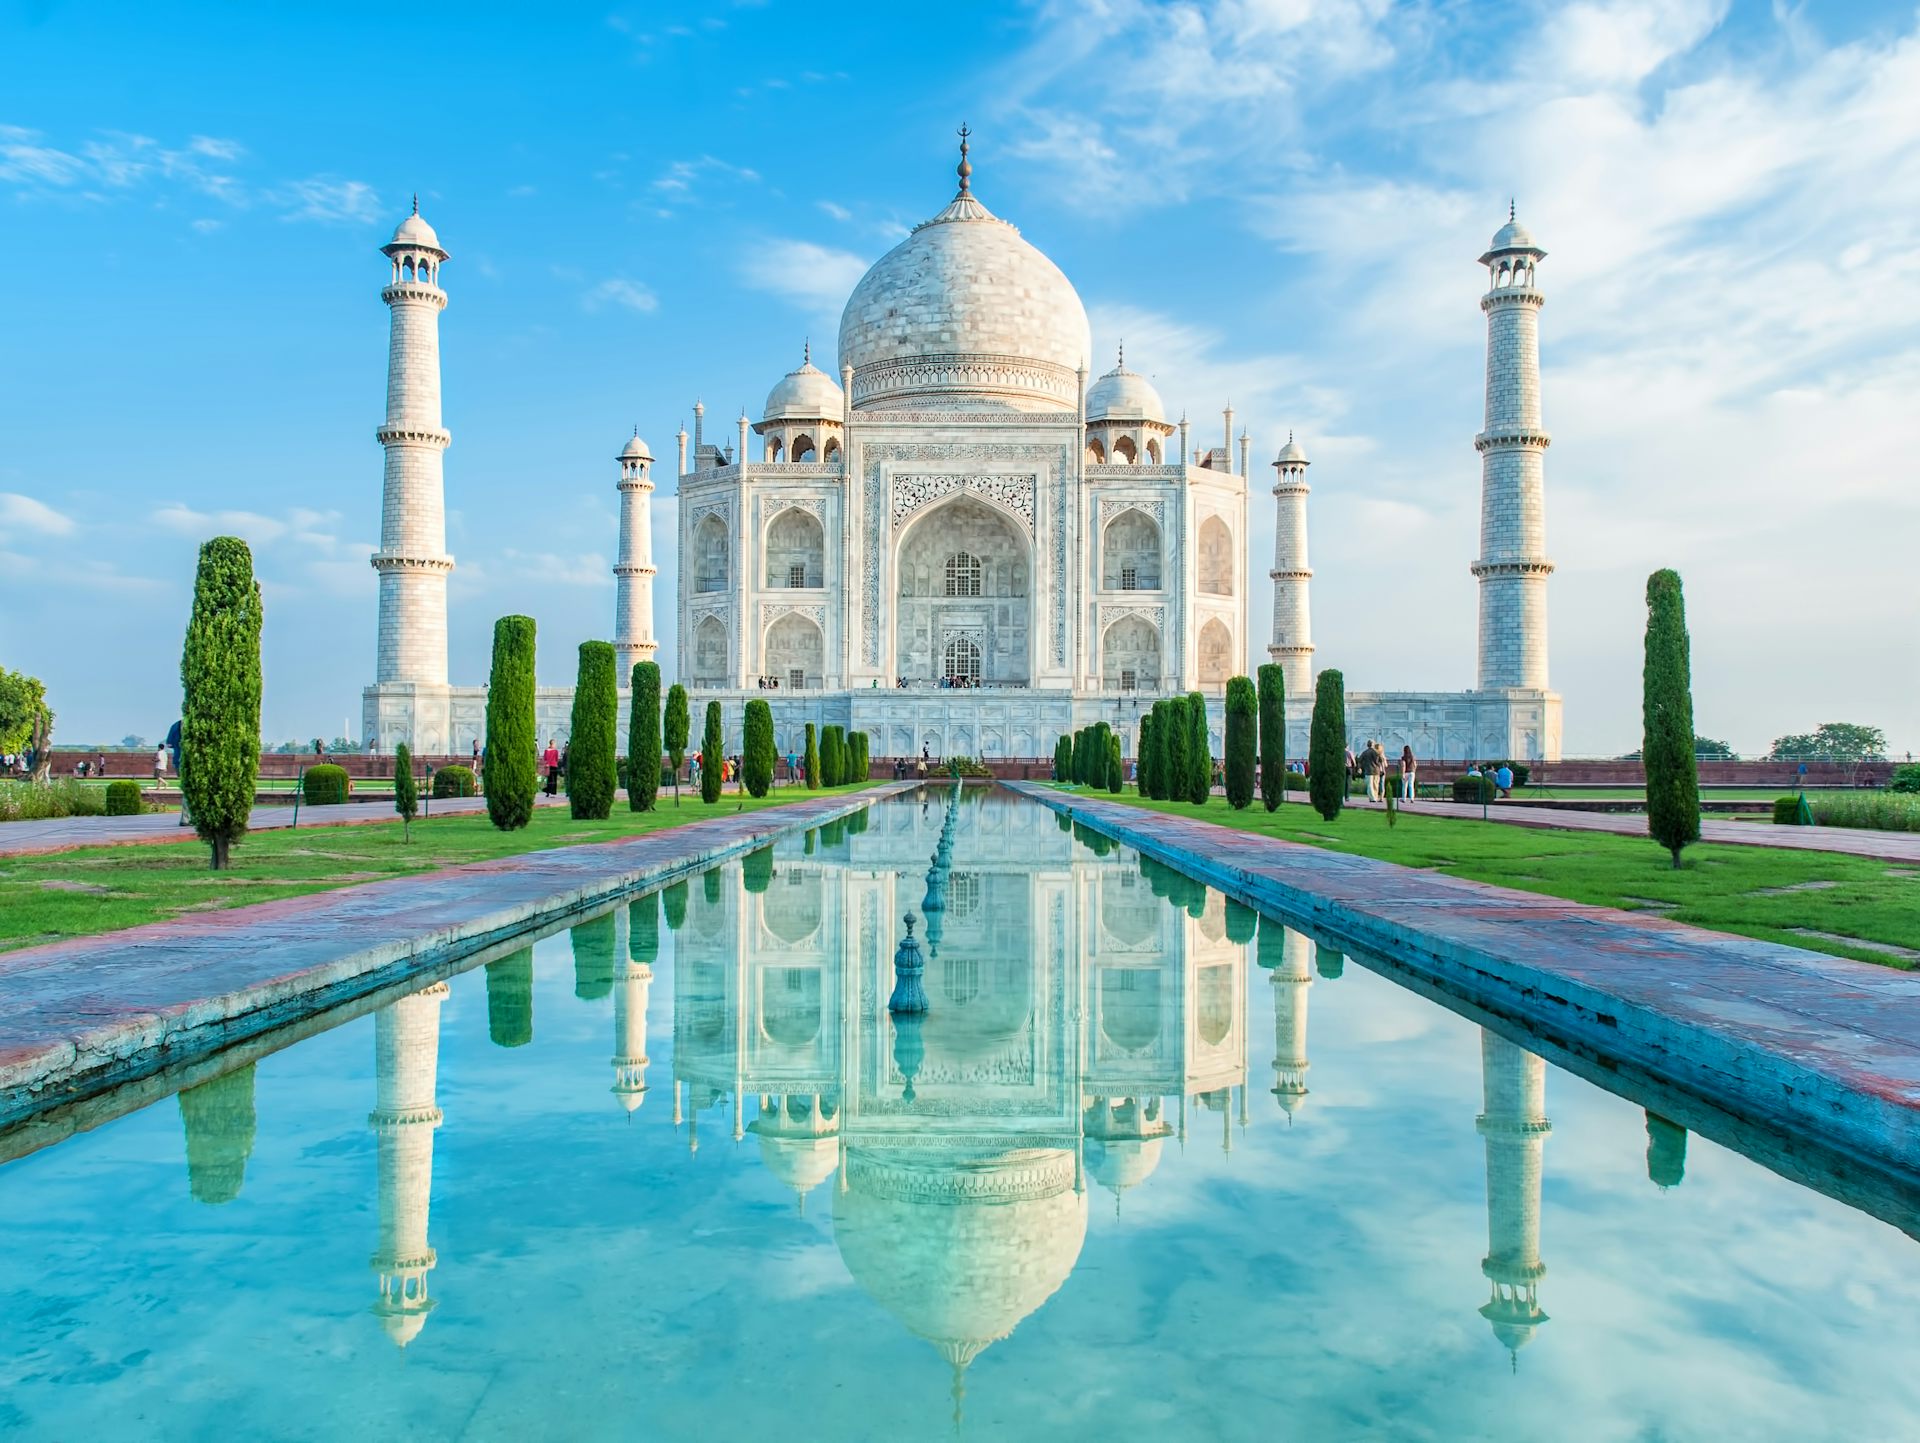 In happier times the Taj was a monument of renowned purity. shutterstock